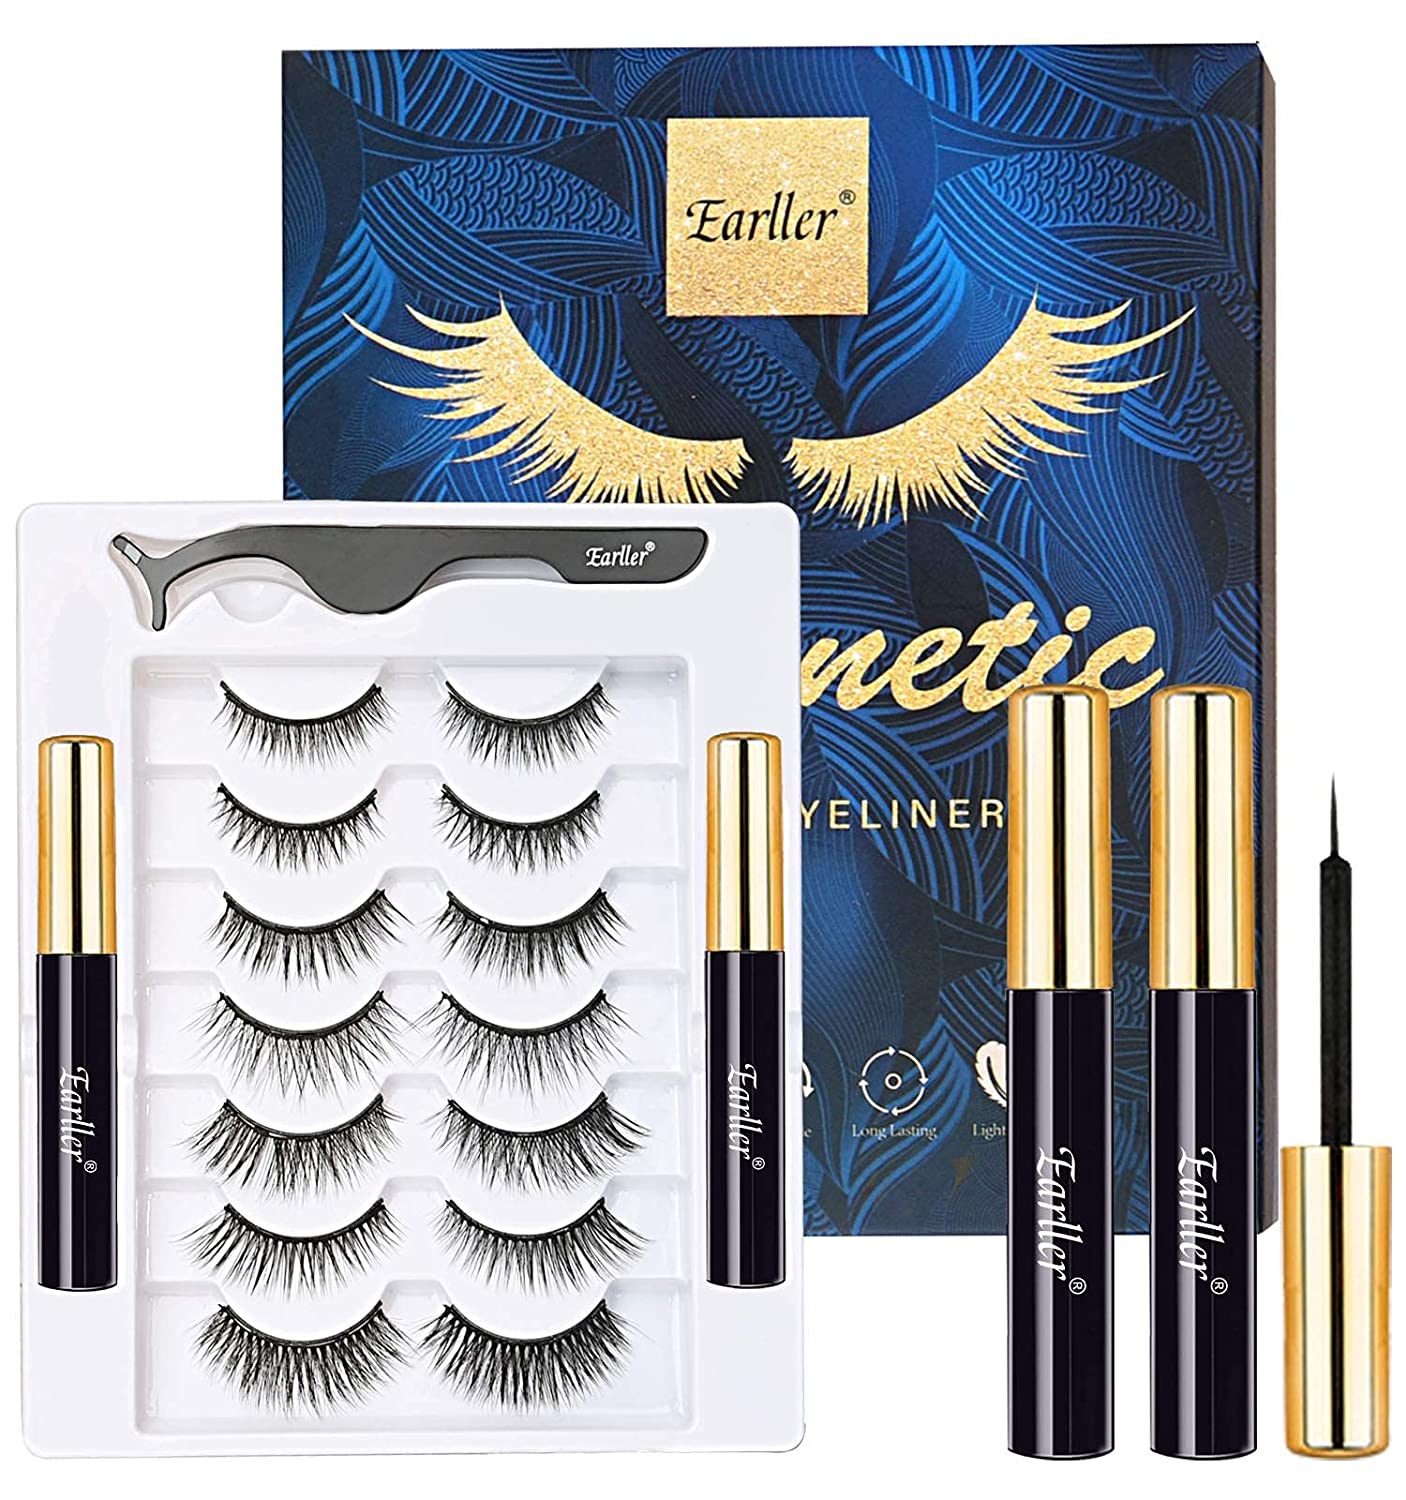 EYEKESHE 7 Pairs of Magnetic Eyelashes, Natural Look, Dramatic, with Eyeliner and Tweezers, Waterproof, Reusable, A Variety of Styles, Suitable for Different Occasions, verpackung wimpern-blaue magnetische paar